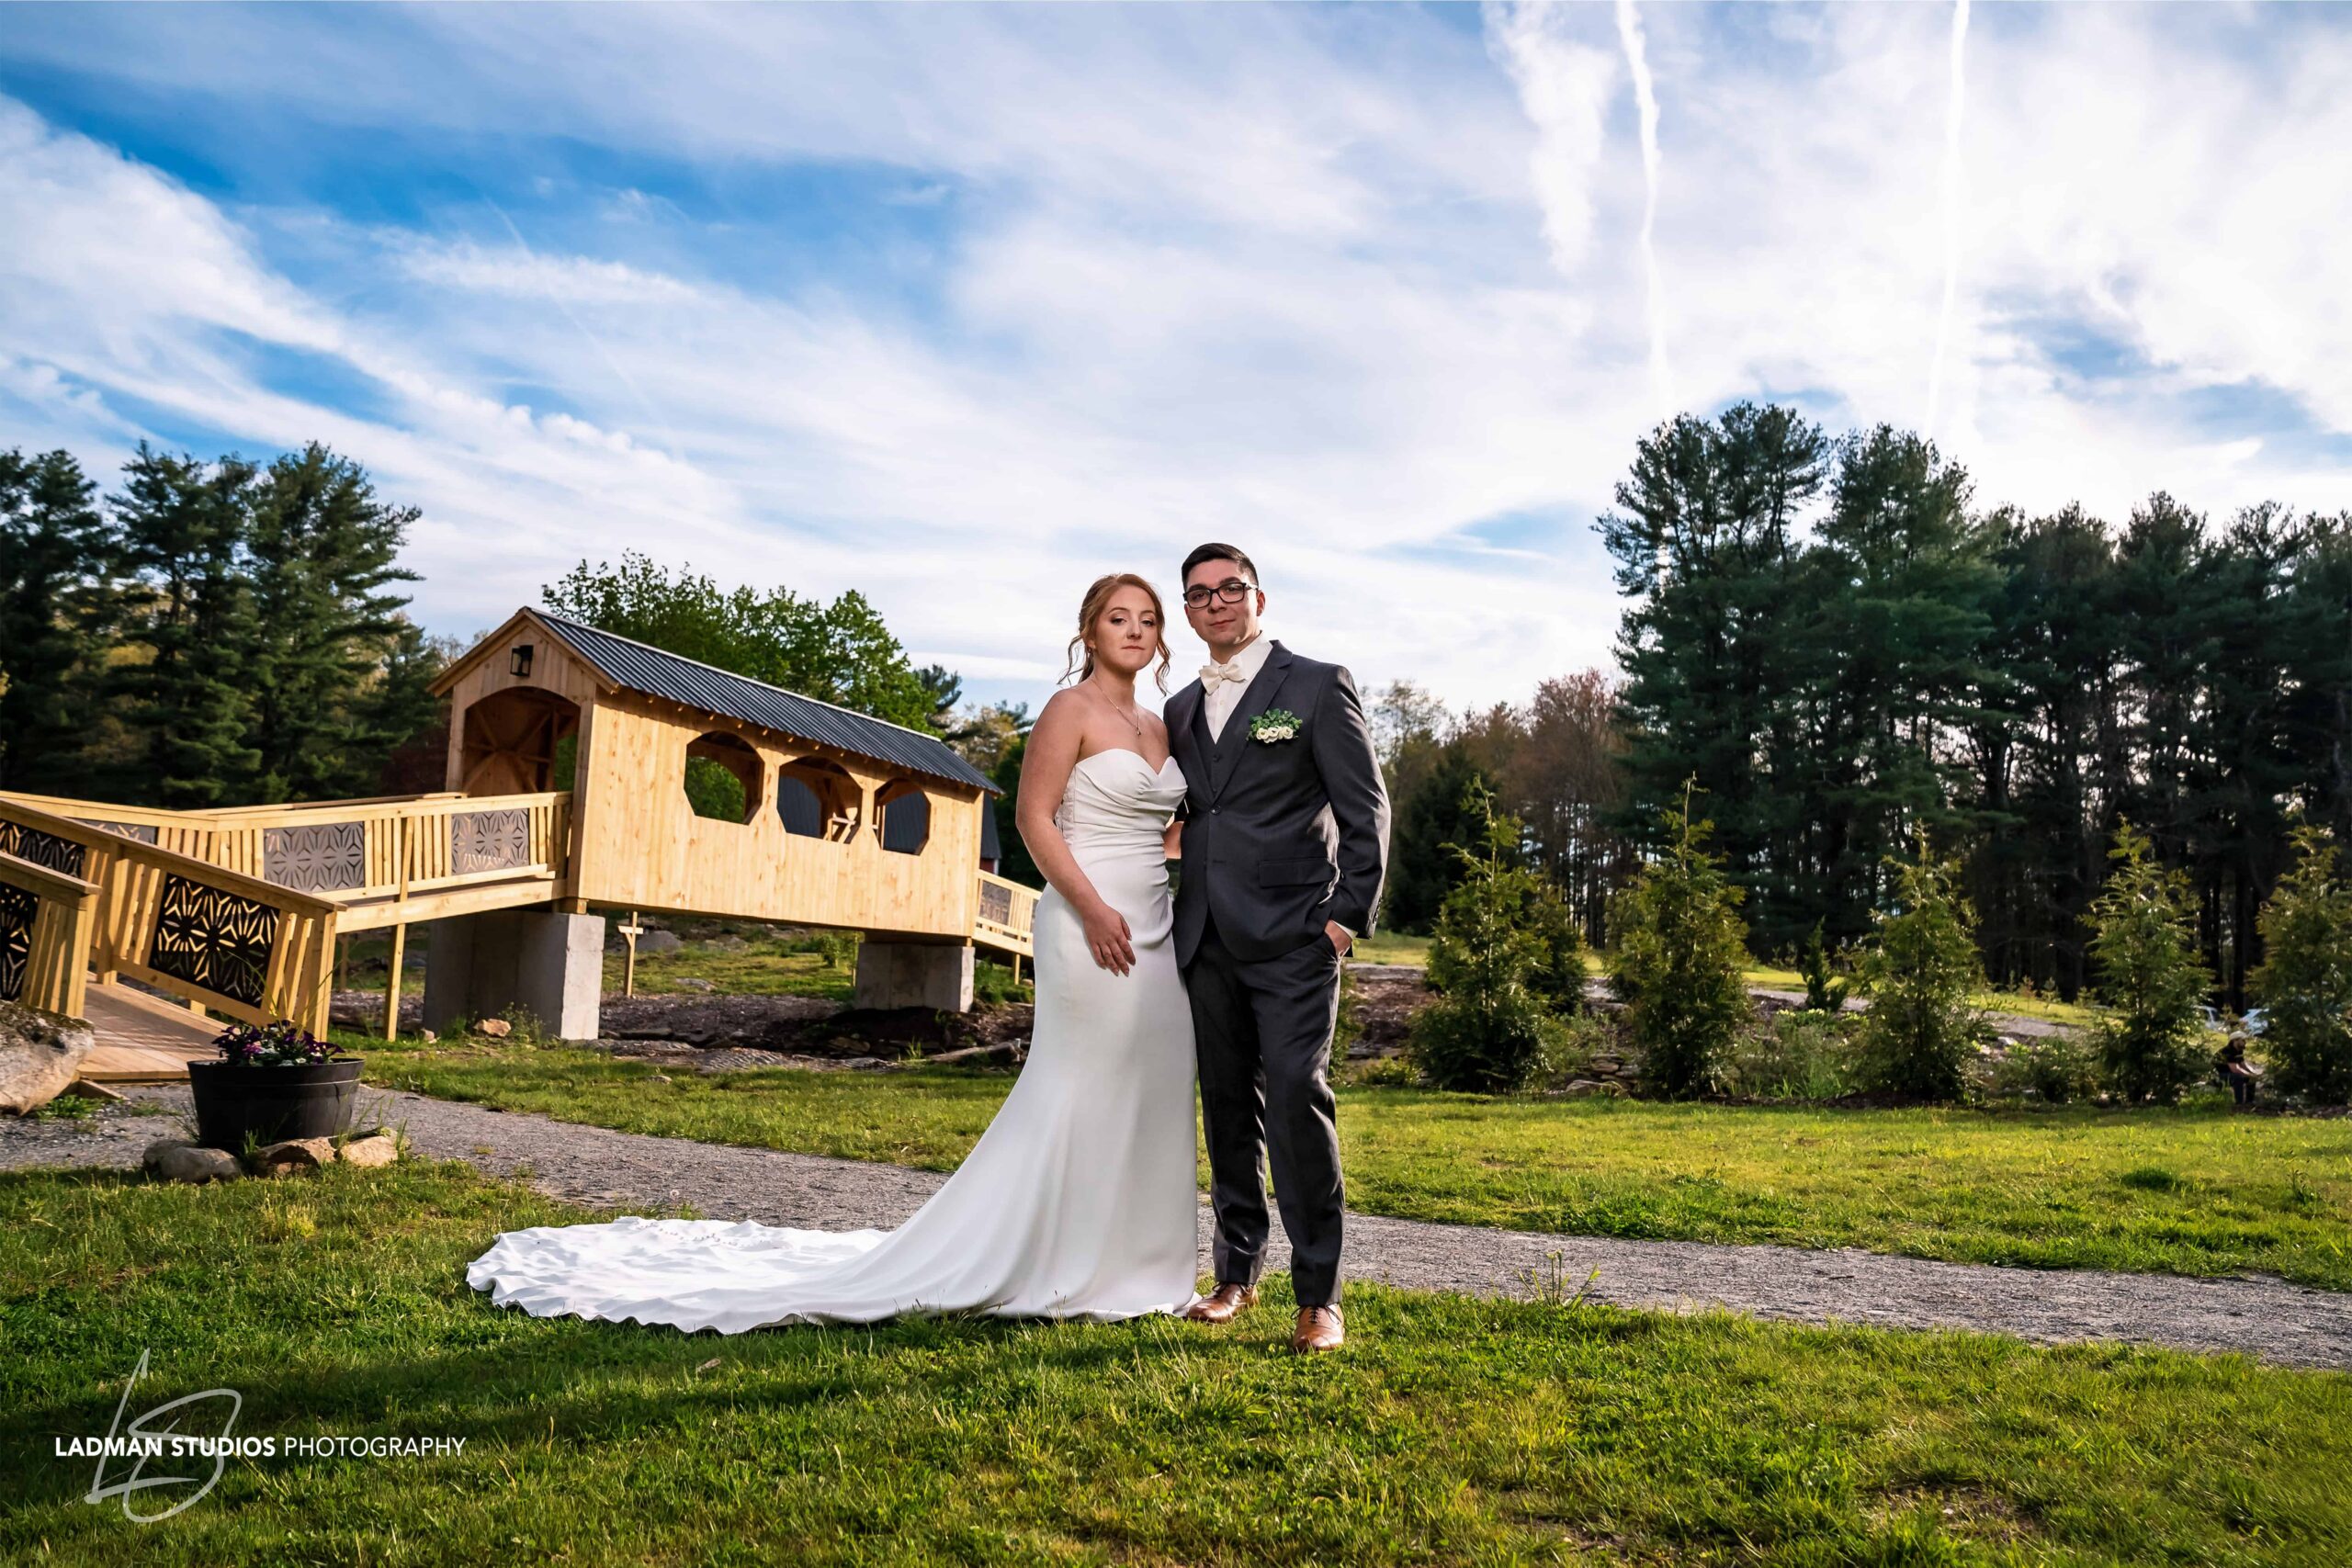 A bride and groom standing in front of a wooden bridge in a rural setting, with trees and a clear sky in the background.